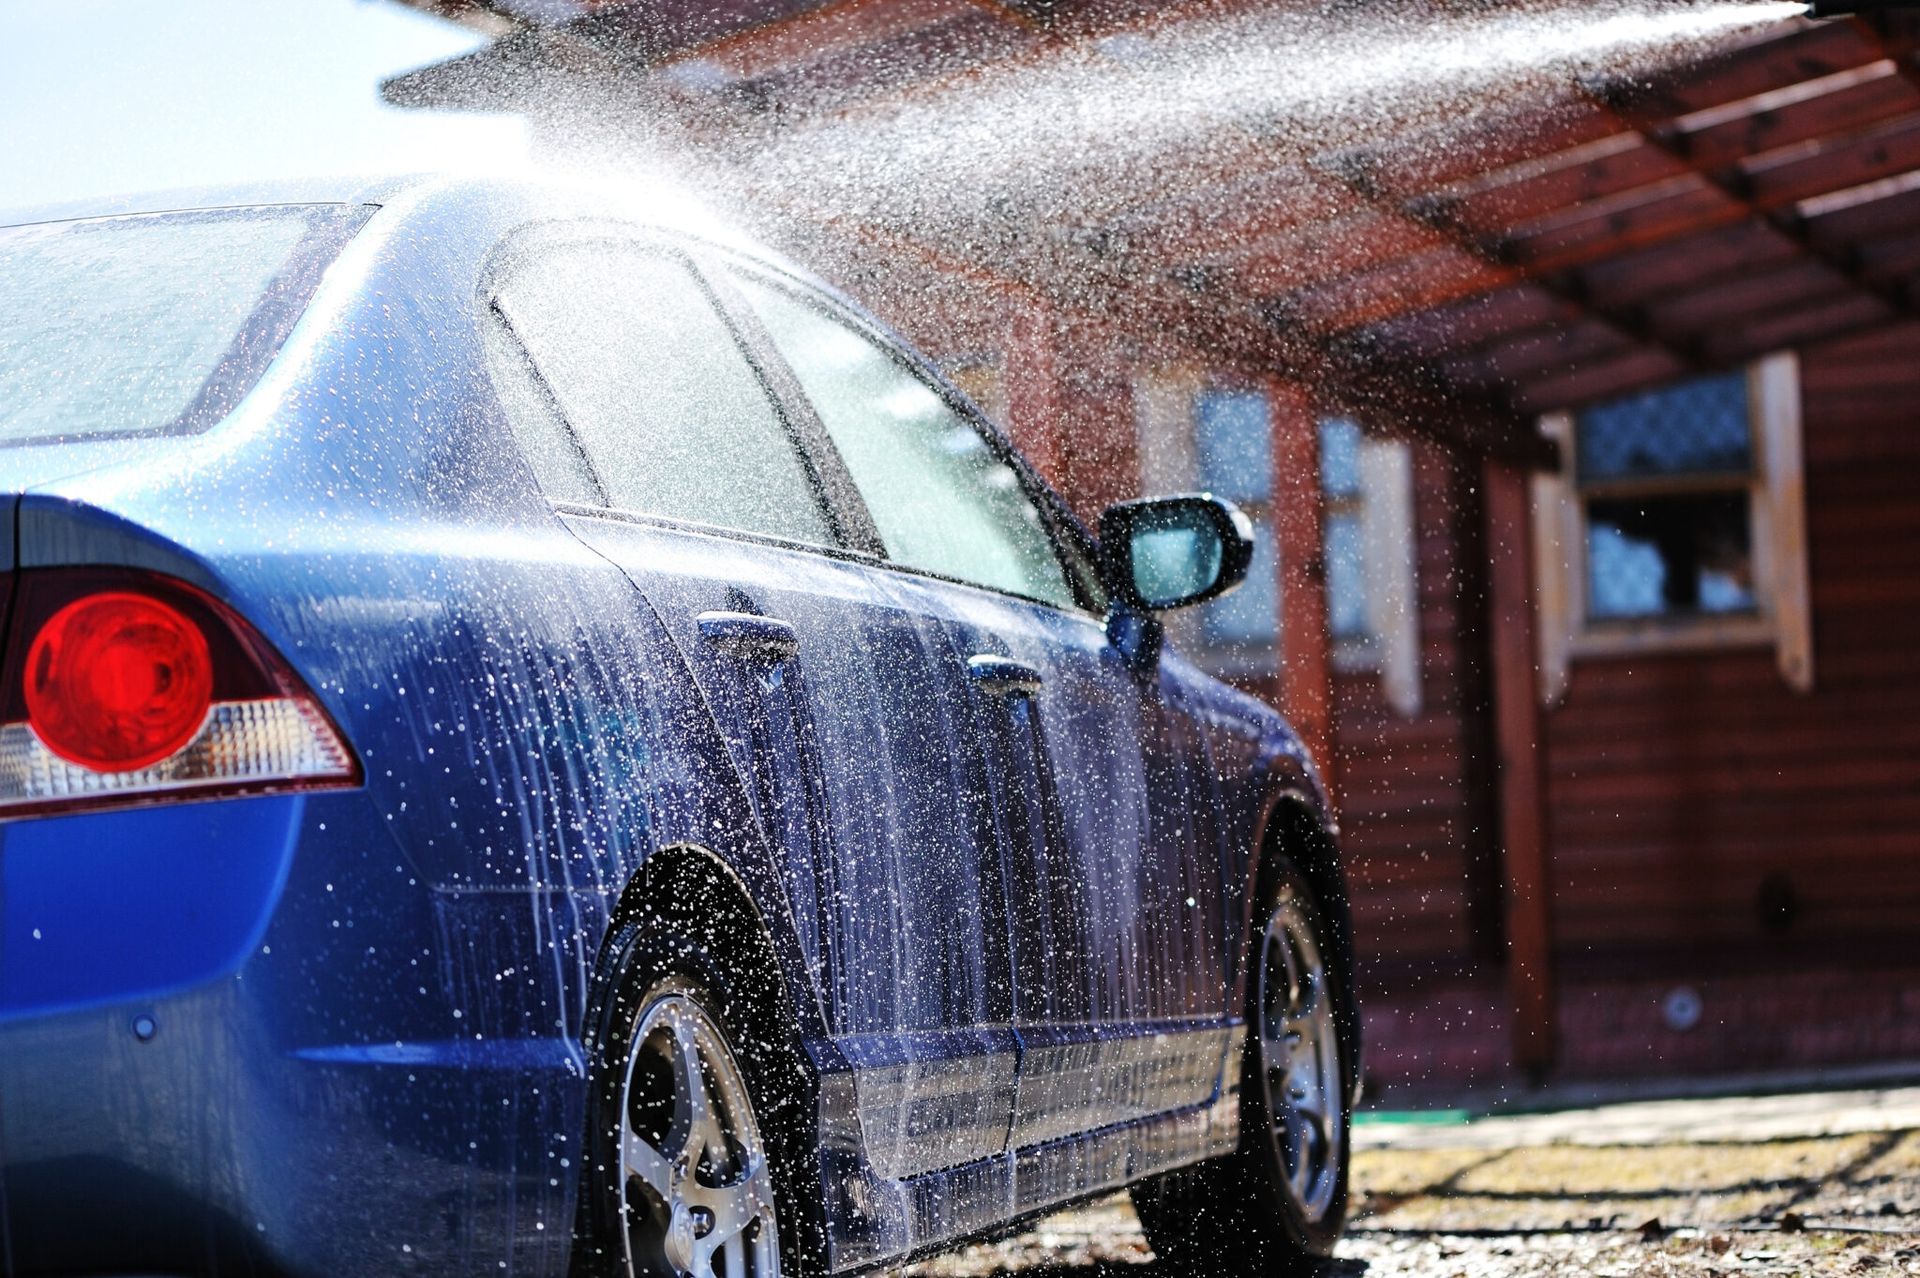 A blue car is being washed in front of a house.